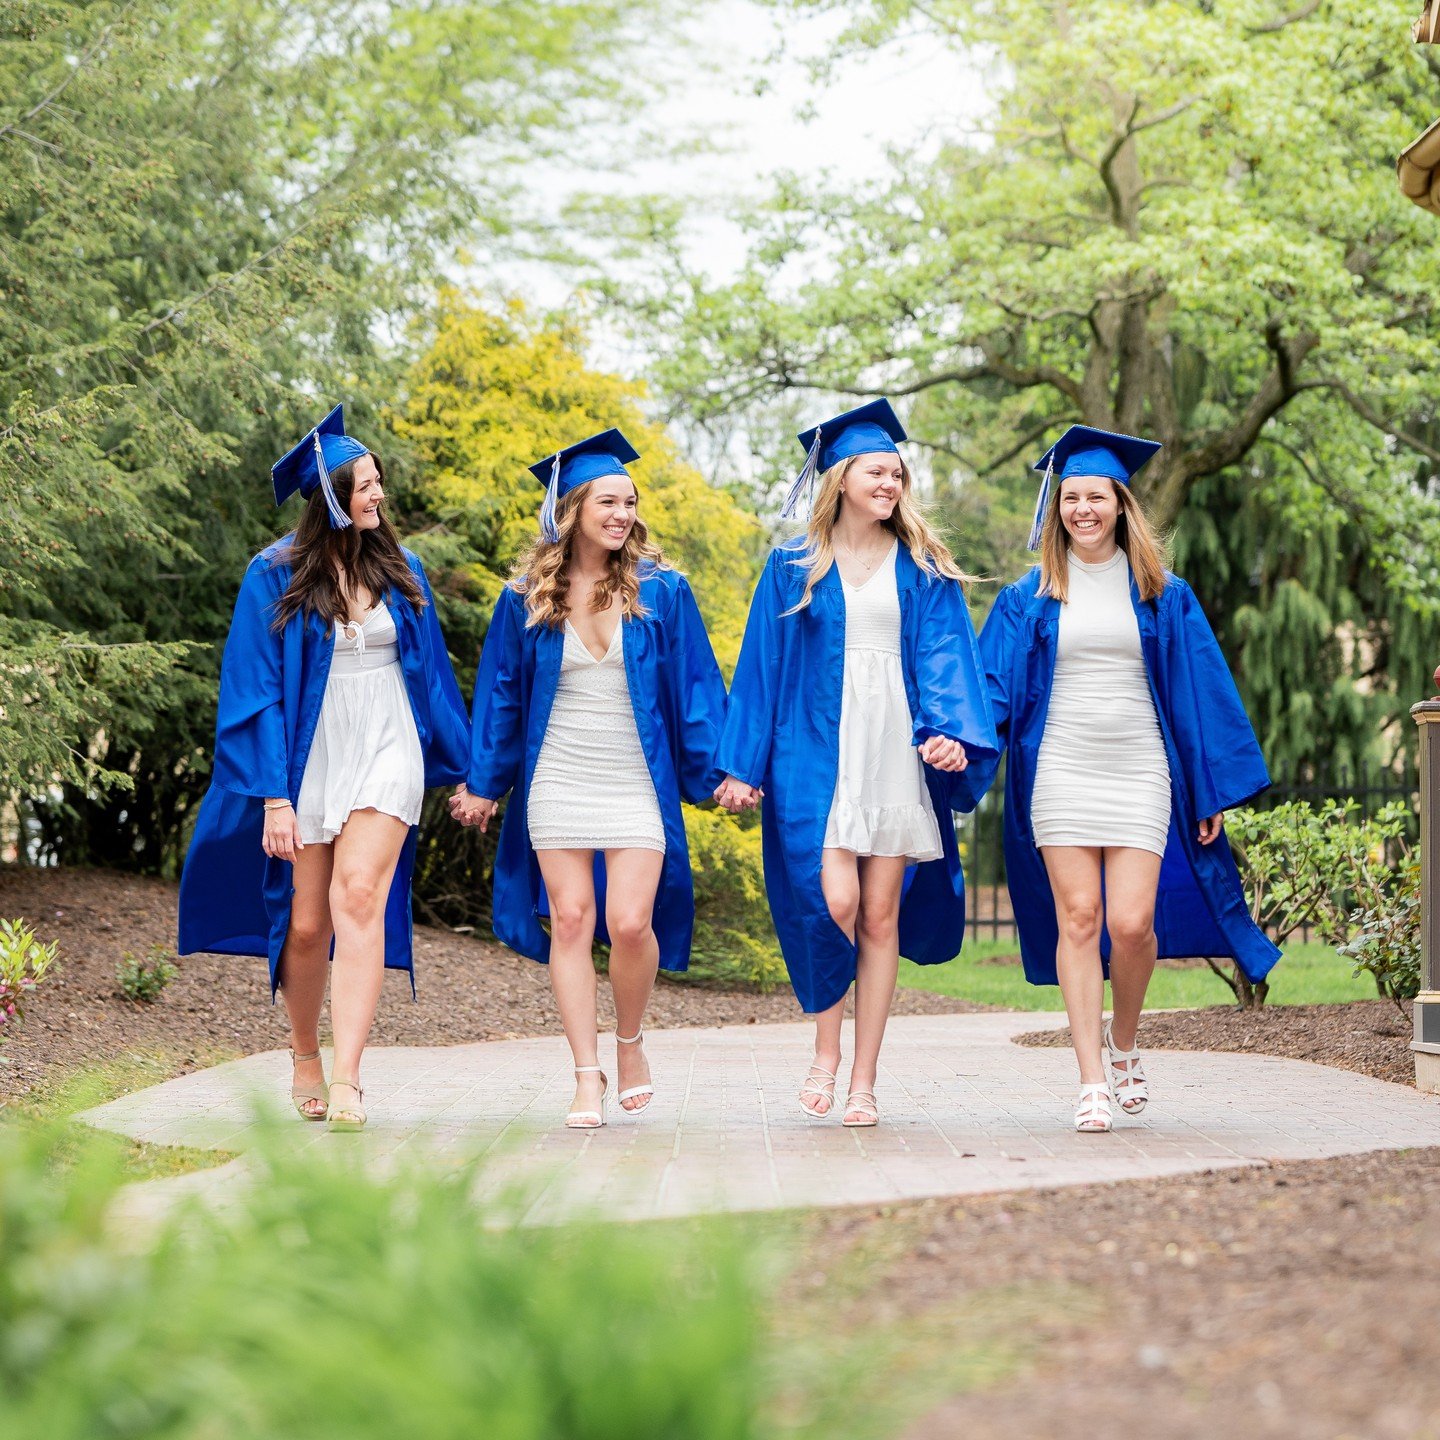 It's grad season! I dodged quite a few raindrops with this cute crew of dental hygiene students, but I love what we captured. Listerine sprays really took it to the next level! Congrats on your upcoming graduation! 🦷